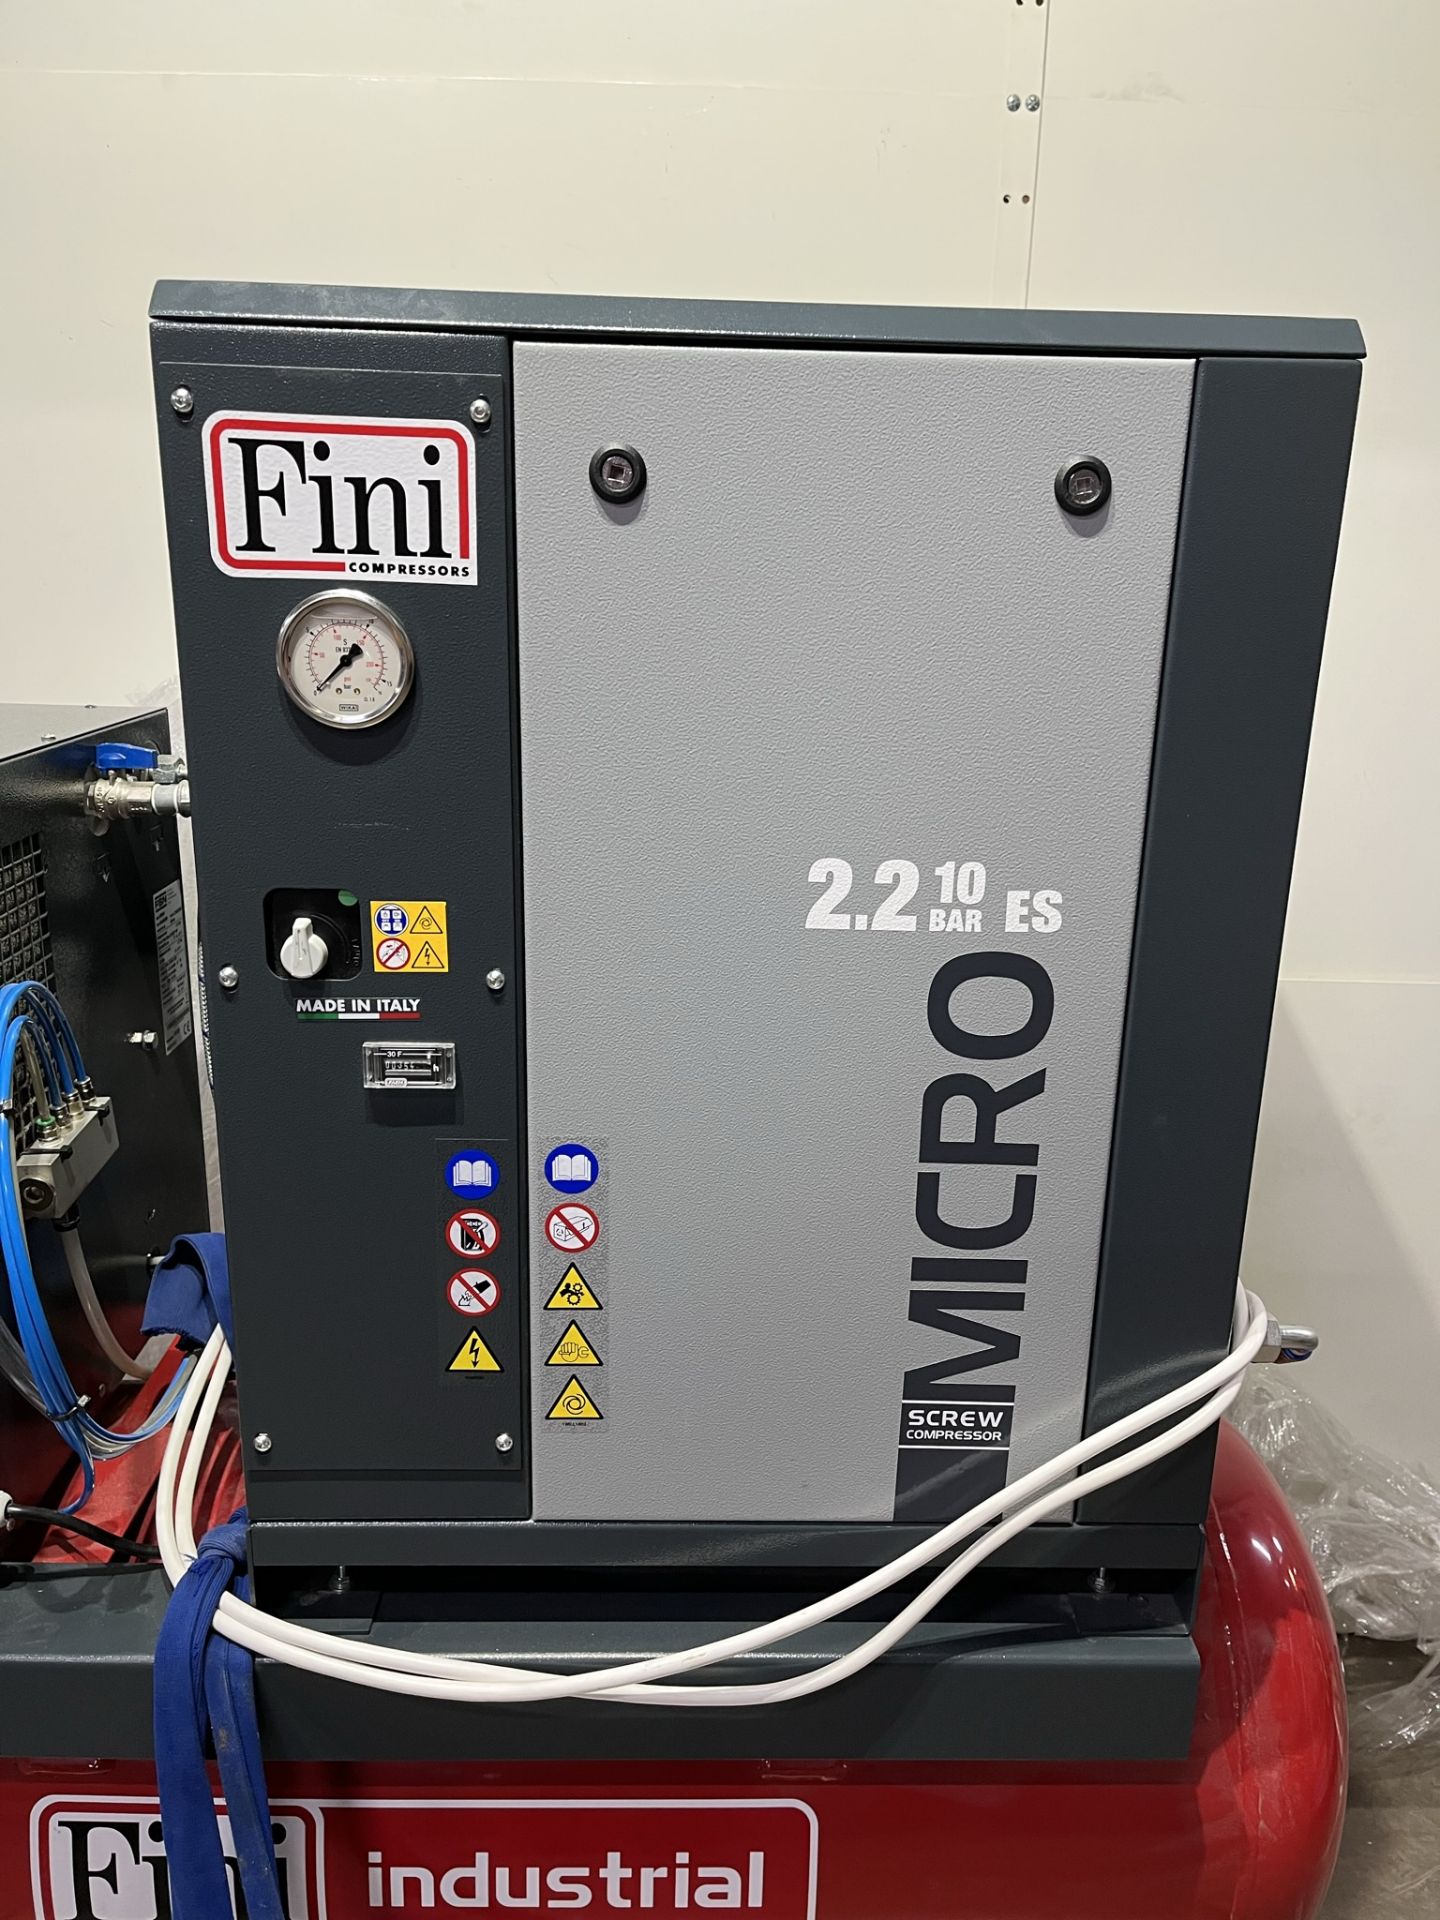 Fini FPS Compressor w/Refrigerated Air Dryer - Image 2 of 8